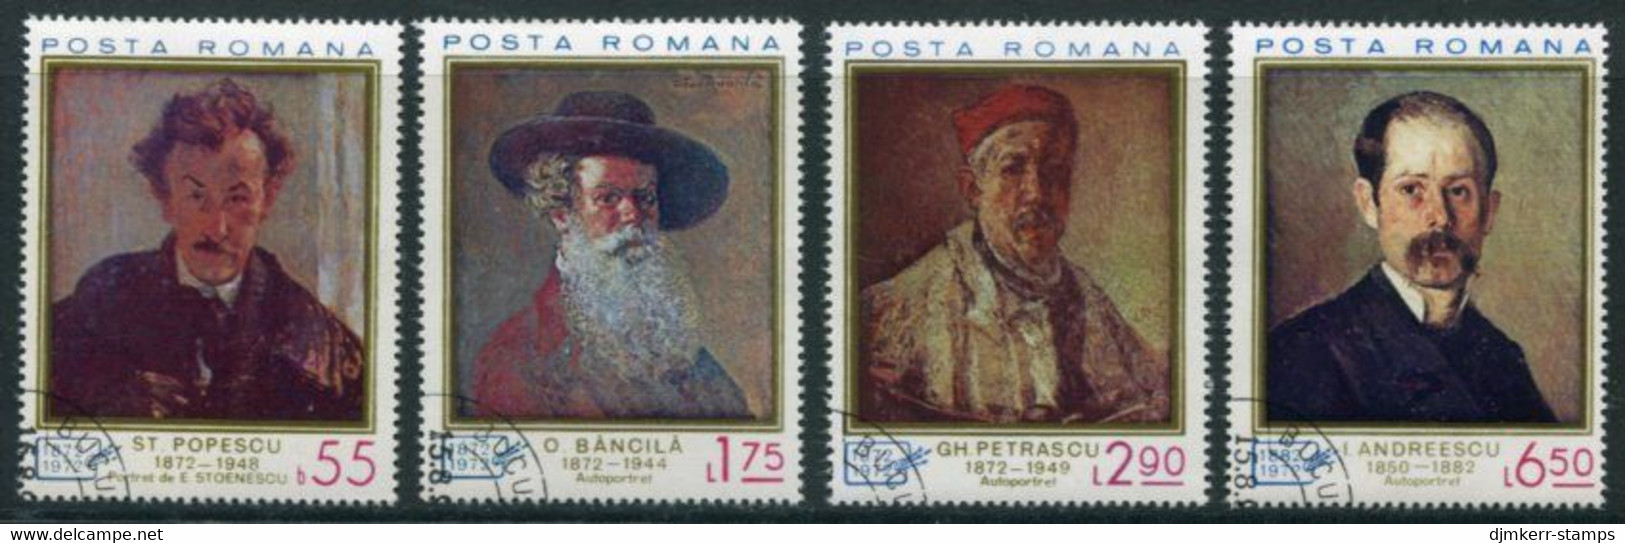 ROMANIA 1972 Portait Paintings Used.  Michel 3044-47 - Used Stamps